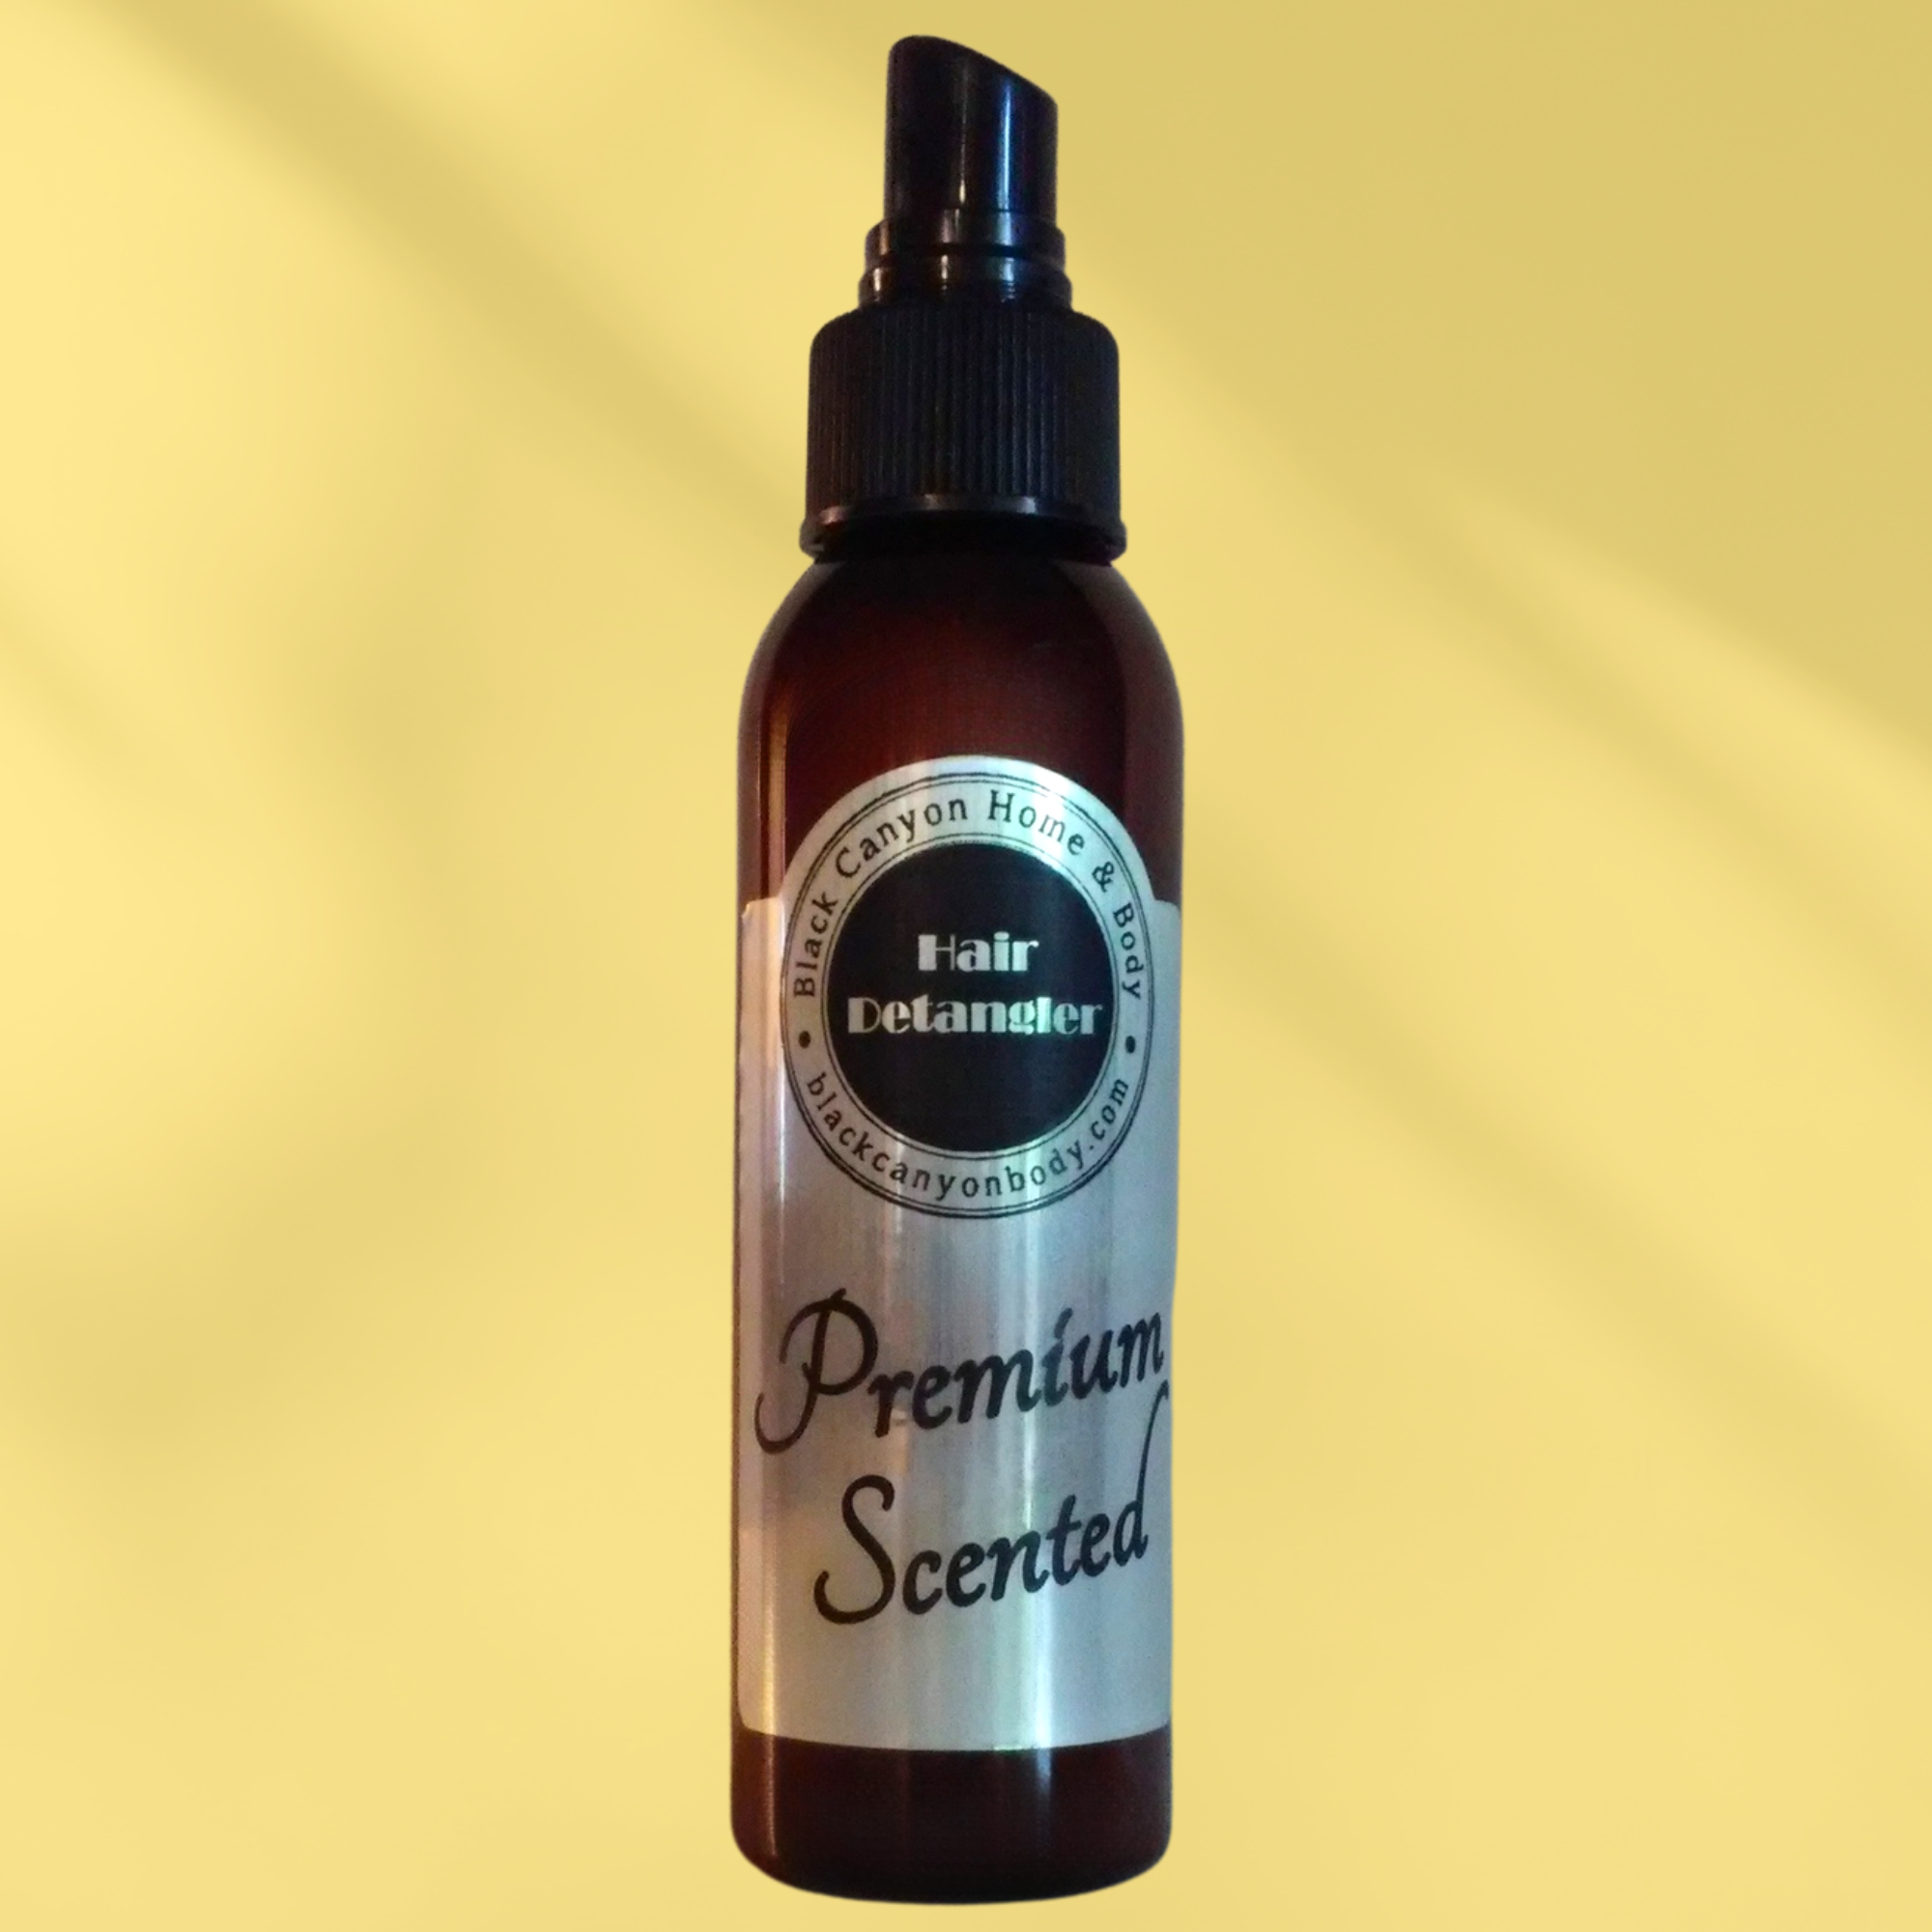 Black Canyon Currant & Honey Scented Hair Detangler Spray with Olive Oil